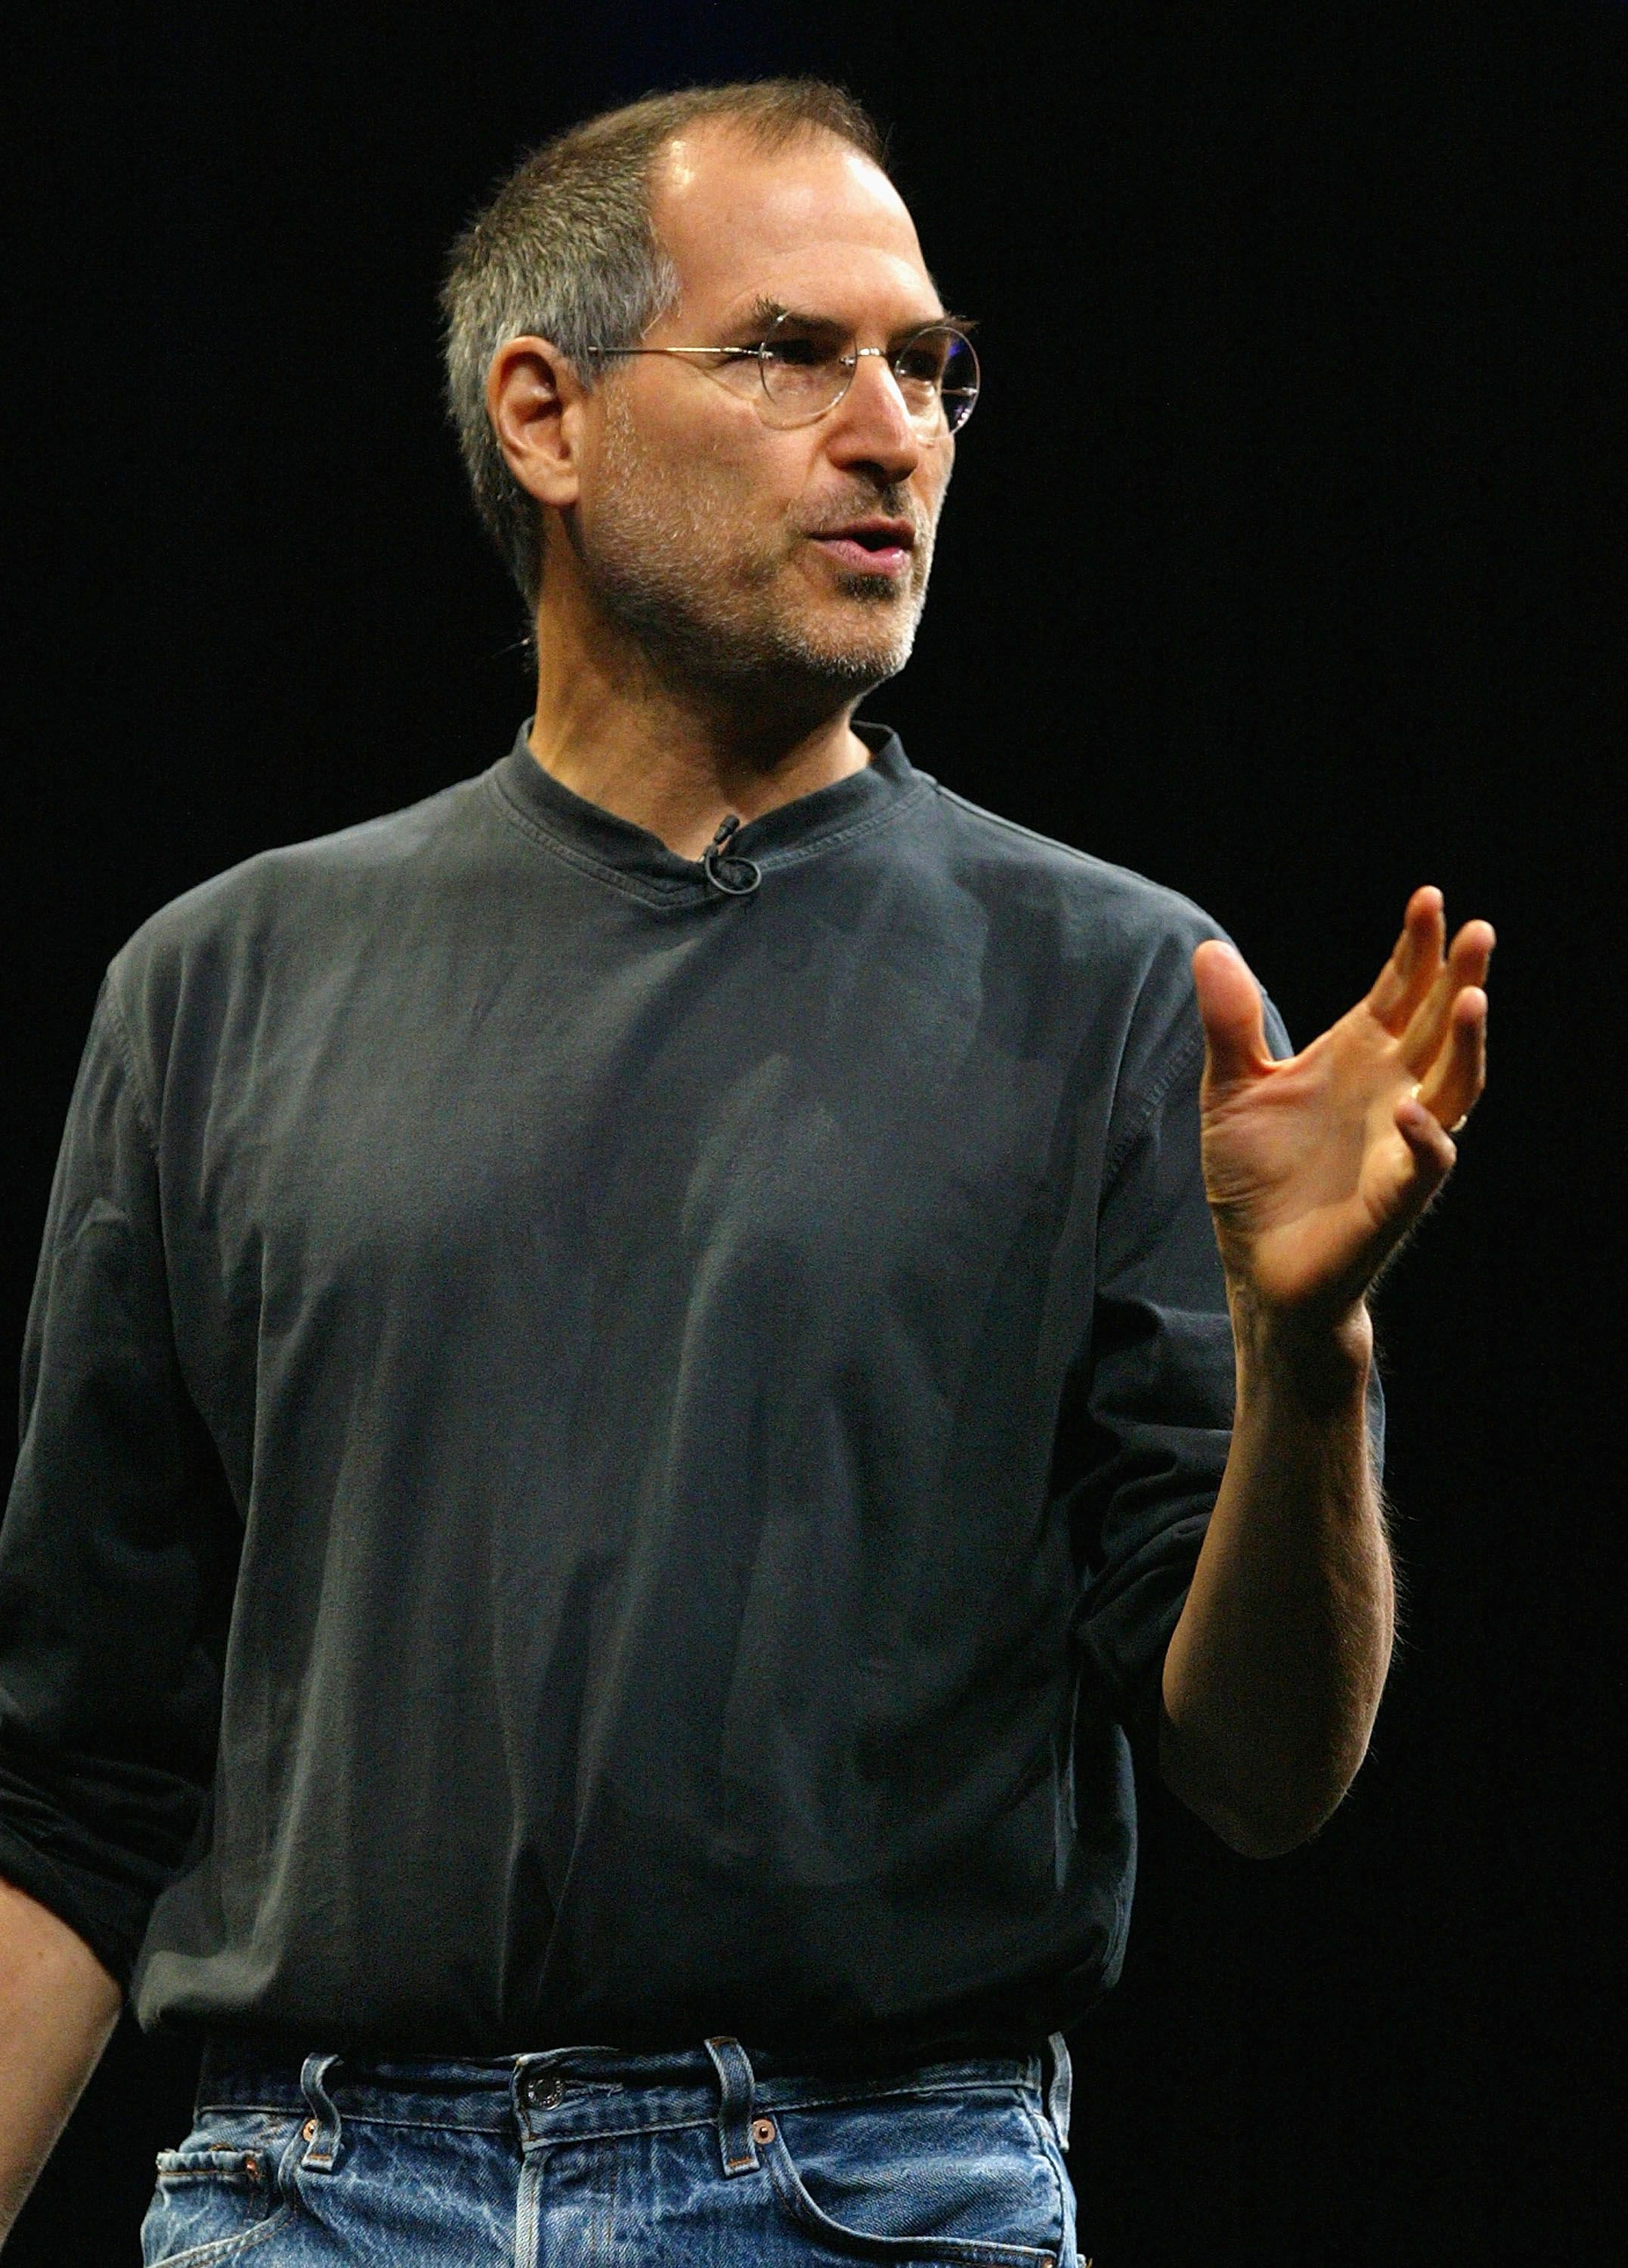 Steve Jobs during the 2004 Worldwide Developers Conference June 28, 2004, in San Francisco, California. | Source: Getty Images